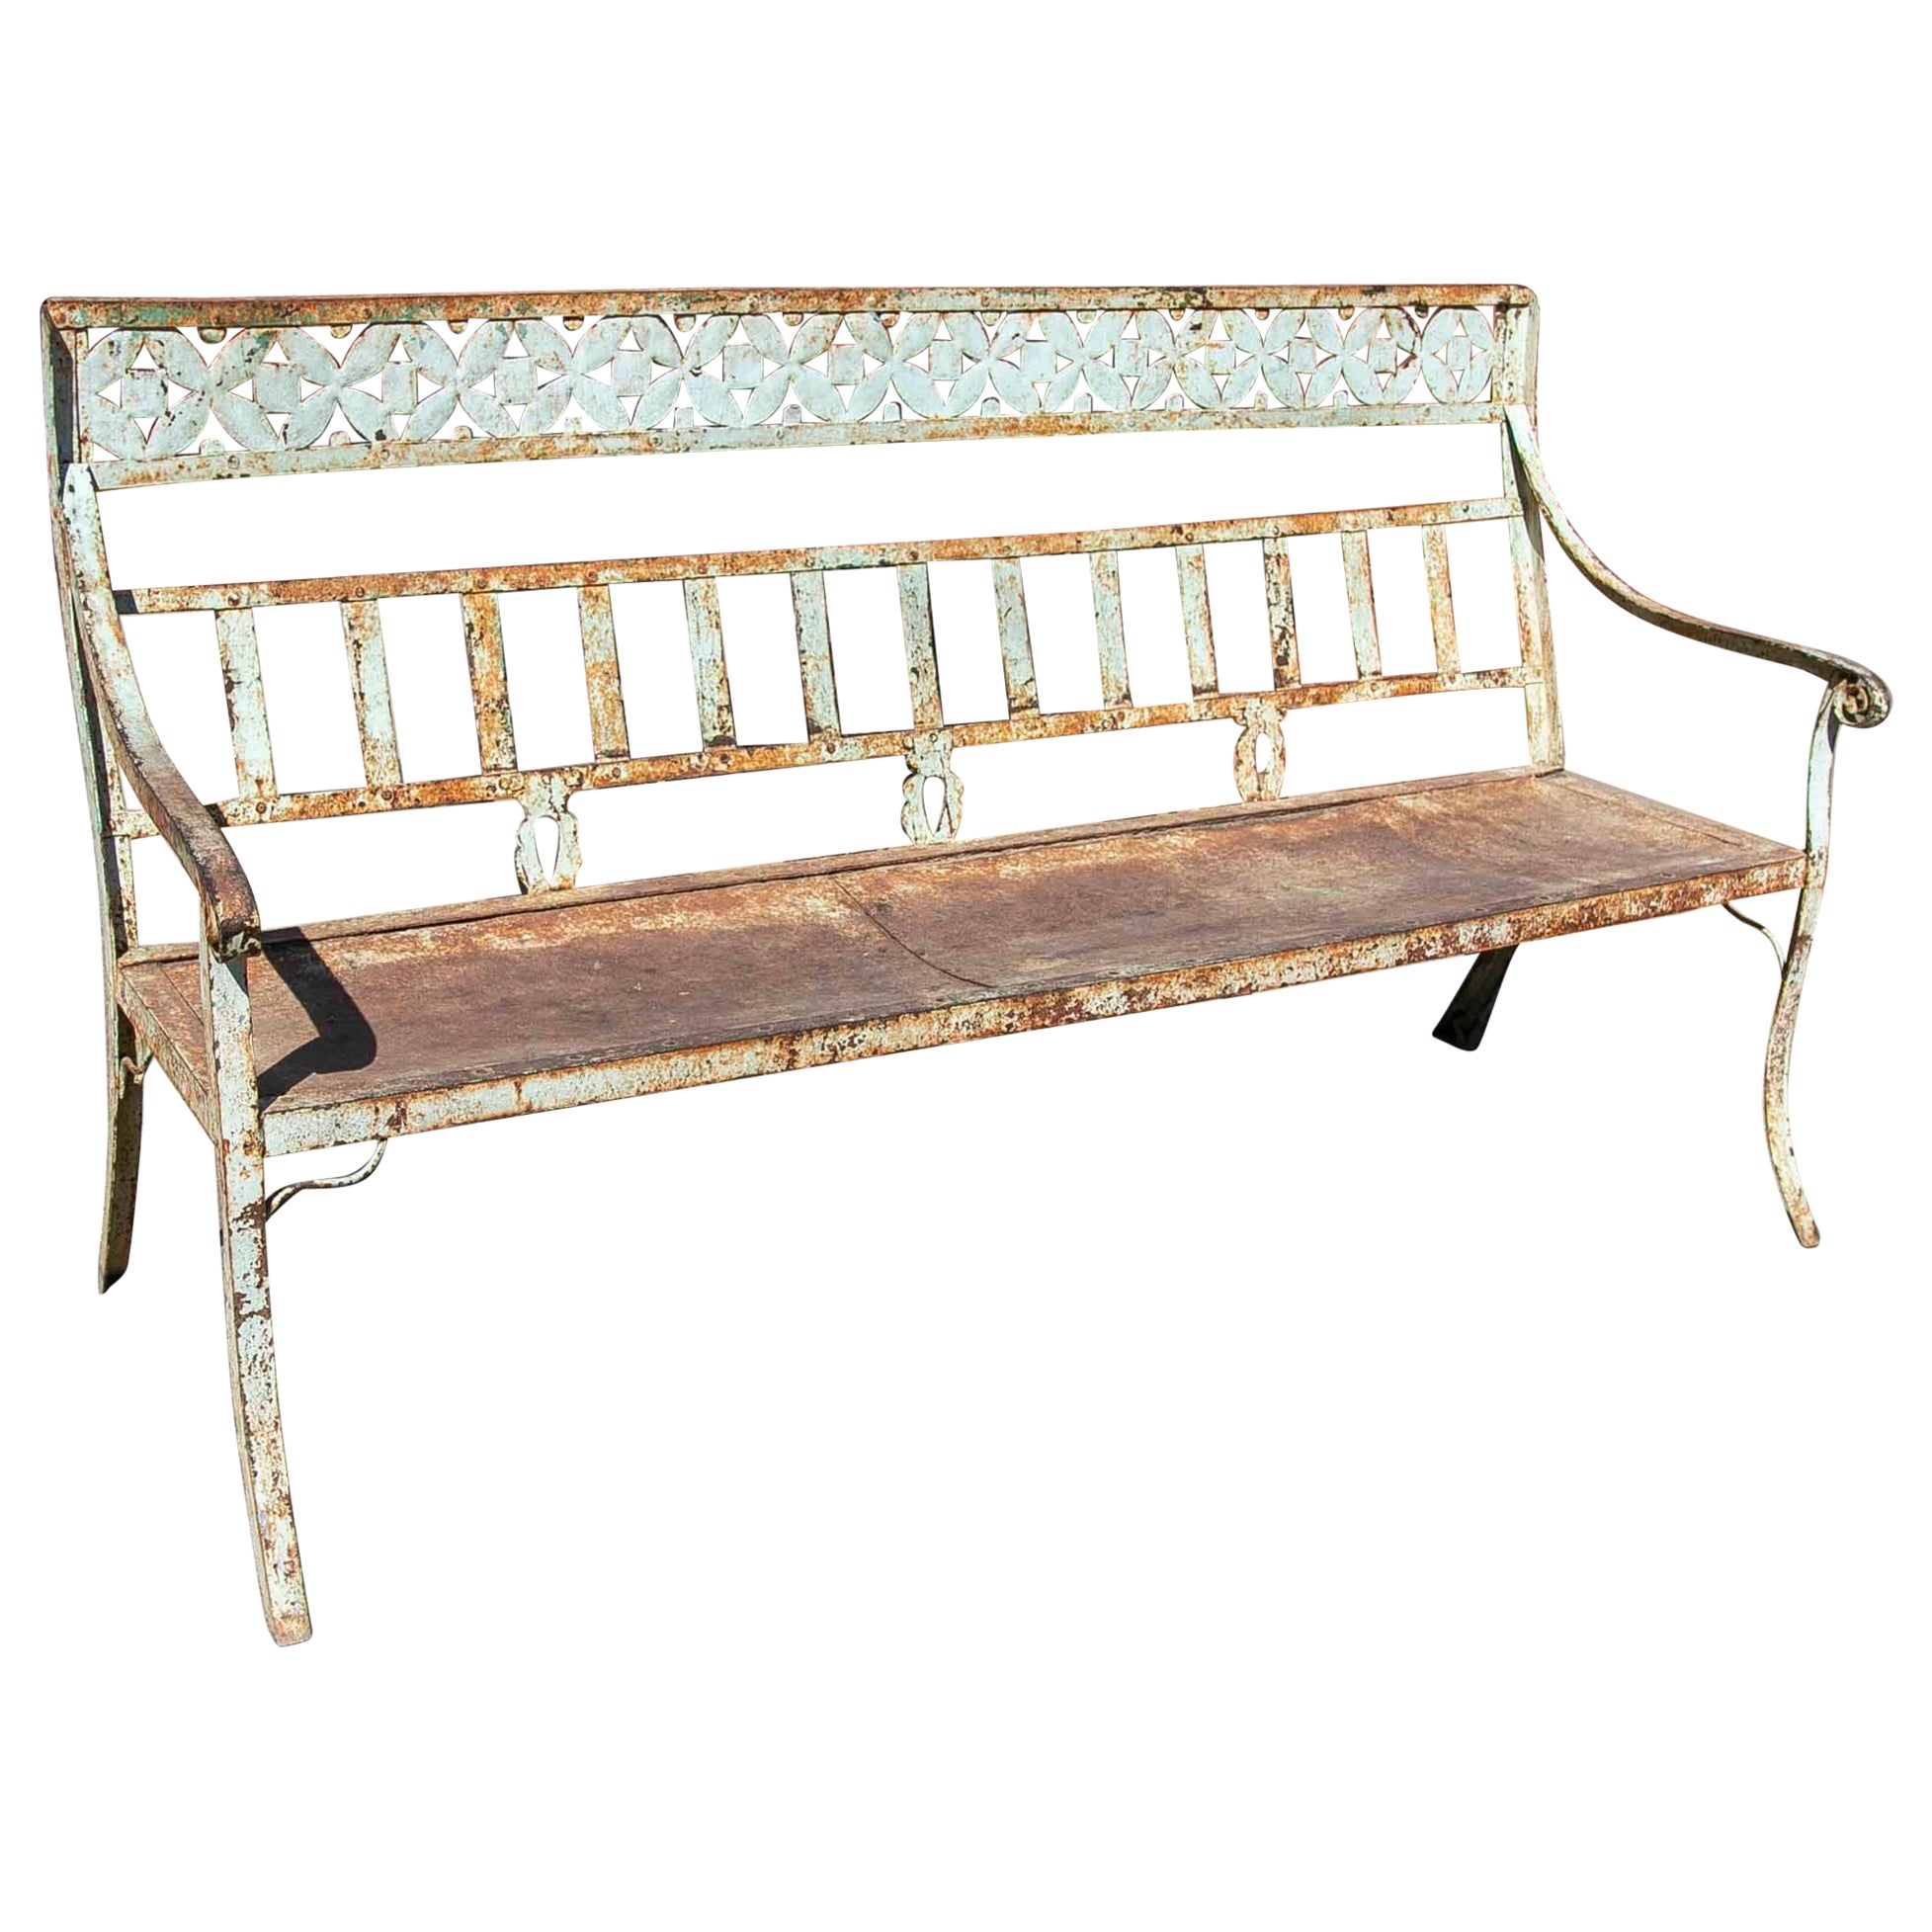 1950s Iron Bench Polychromed with Flowers Decoration For Sale